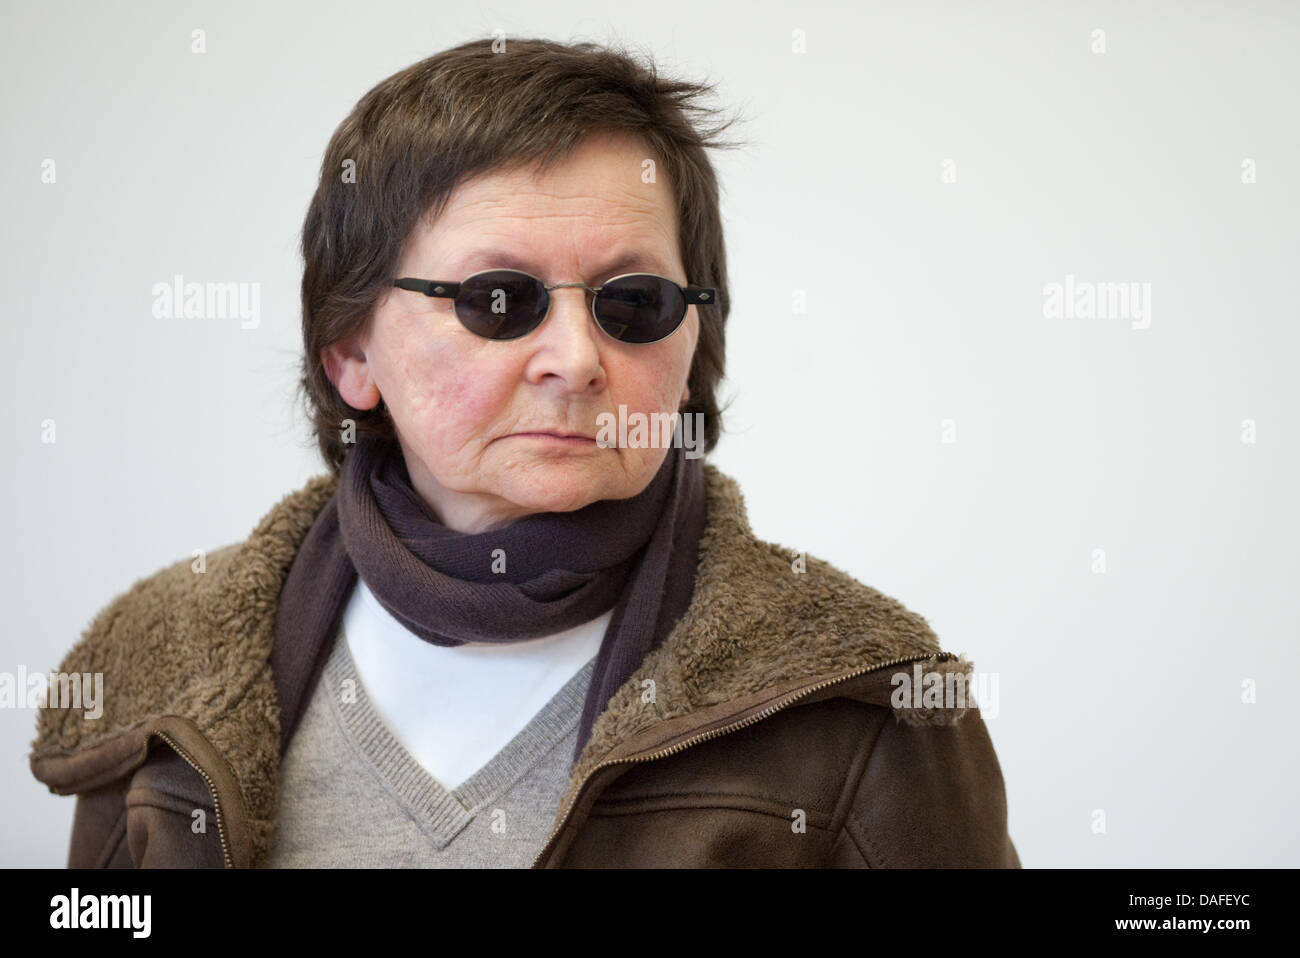 Former RAF terrorist and defendant Verena Becker is pictured before trial at the district court in Stuttgart, Germany, 24 February 2011. Becker is accused of being an accomplice of the murder of Attourney General Buback in 1977. Photo: Uwe Anspach Stock Photo